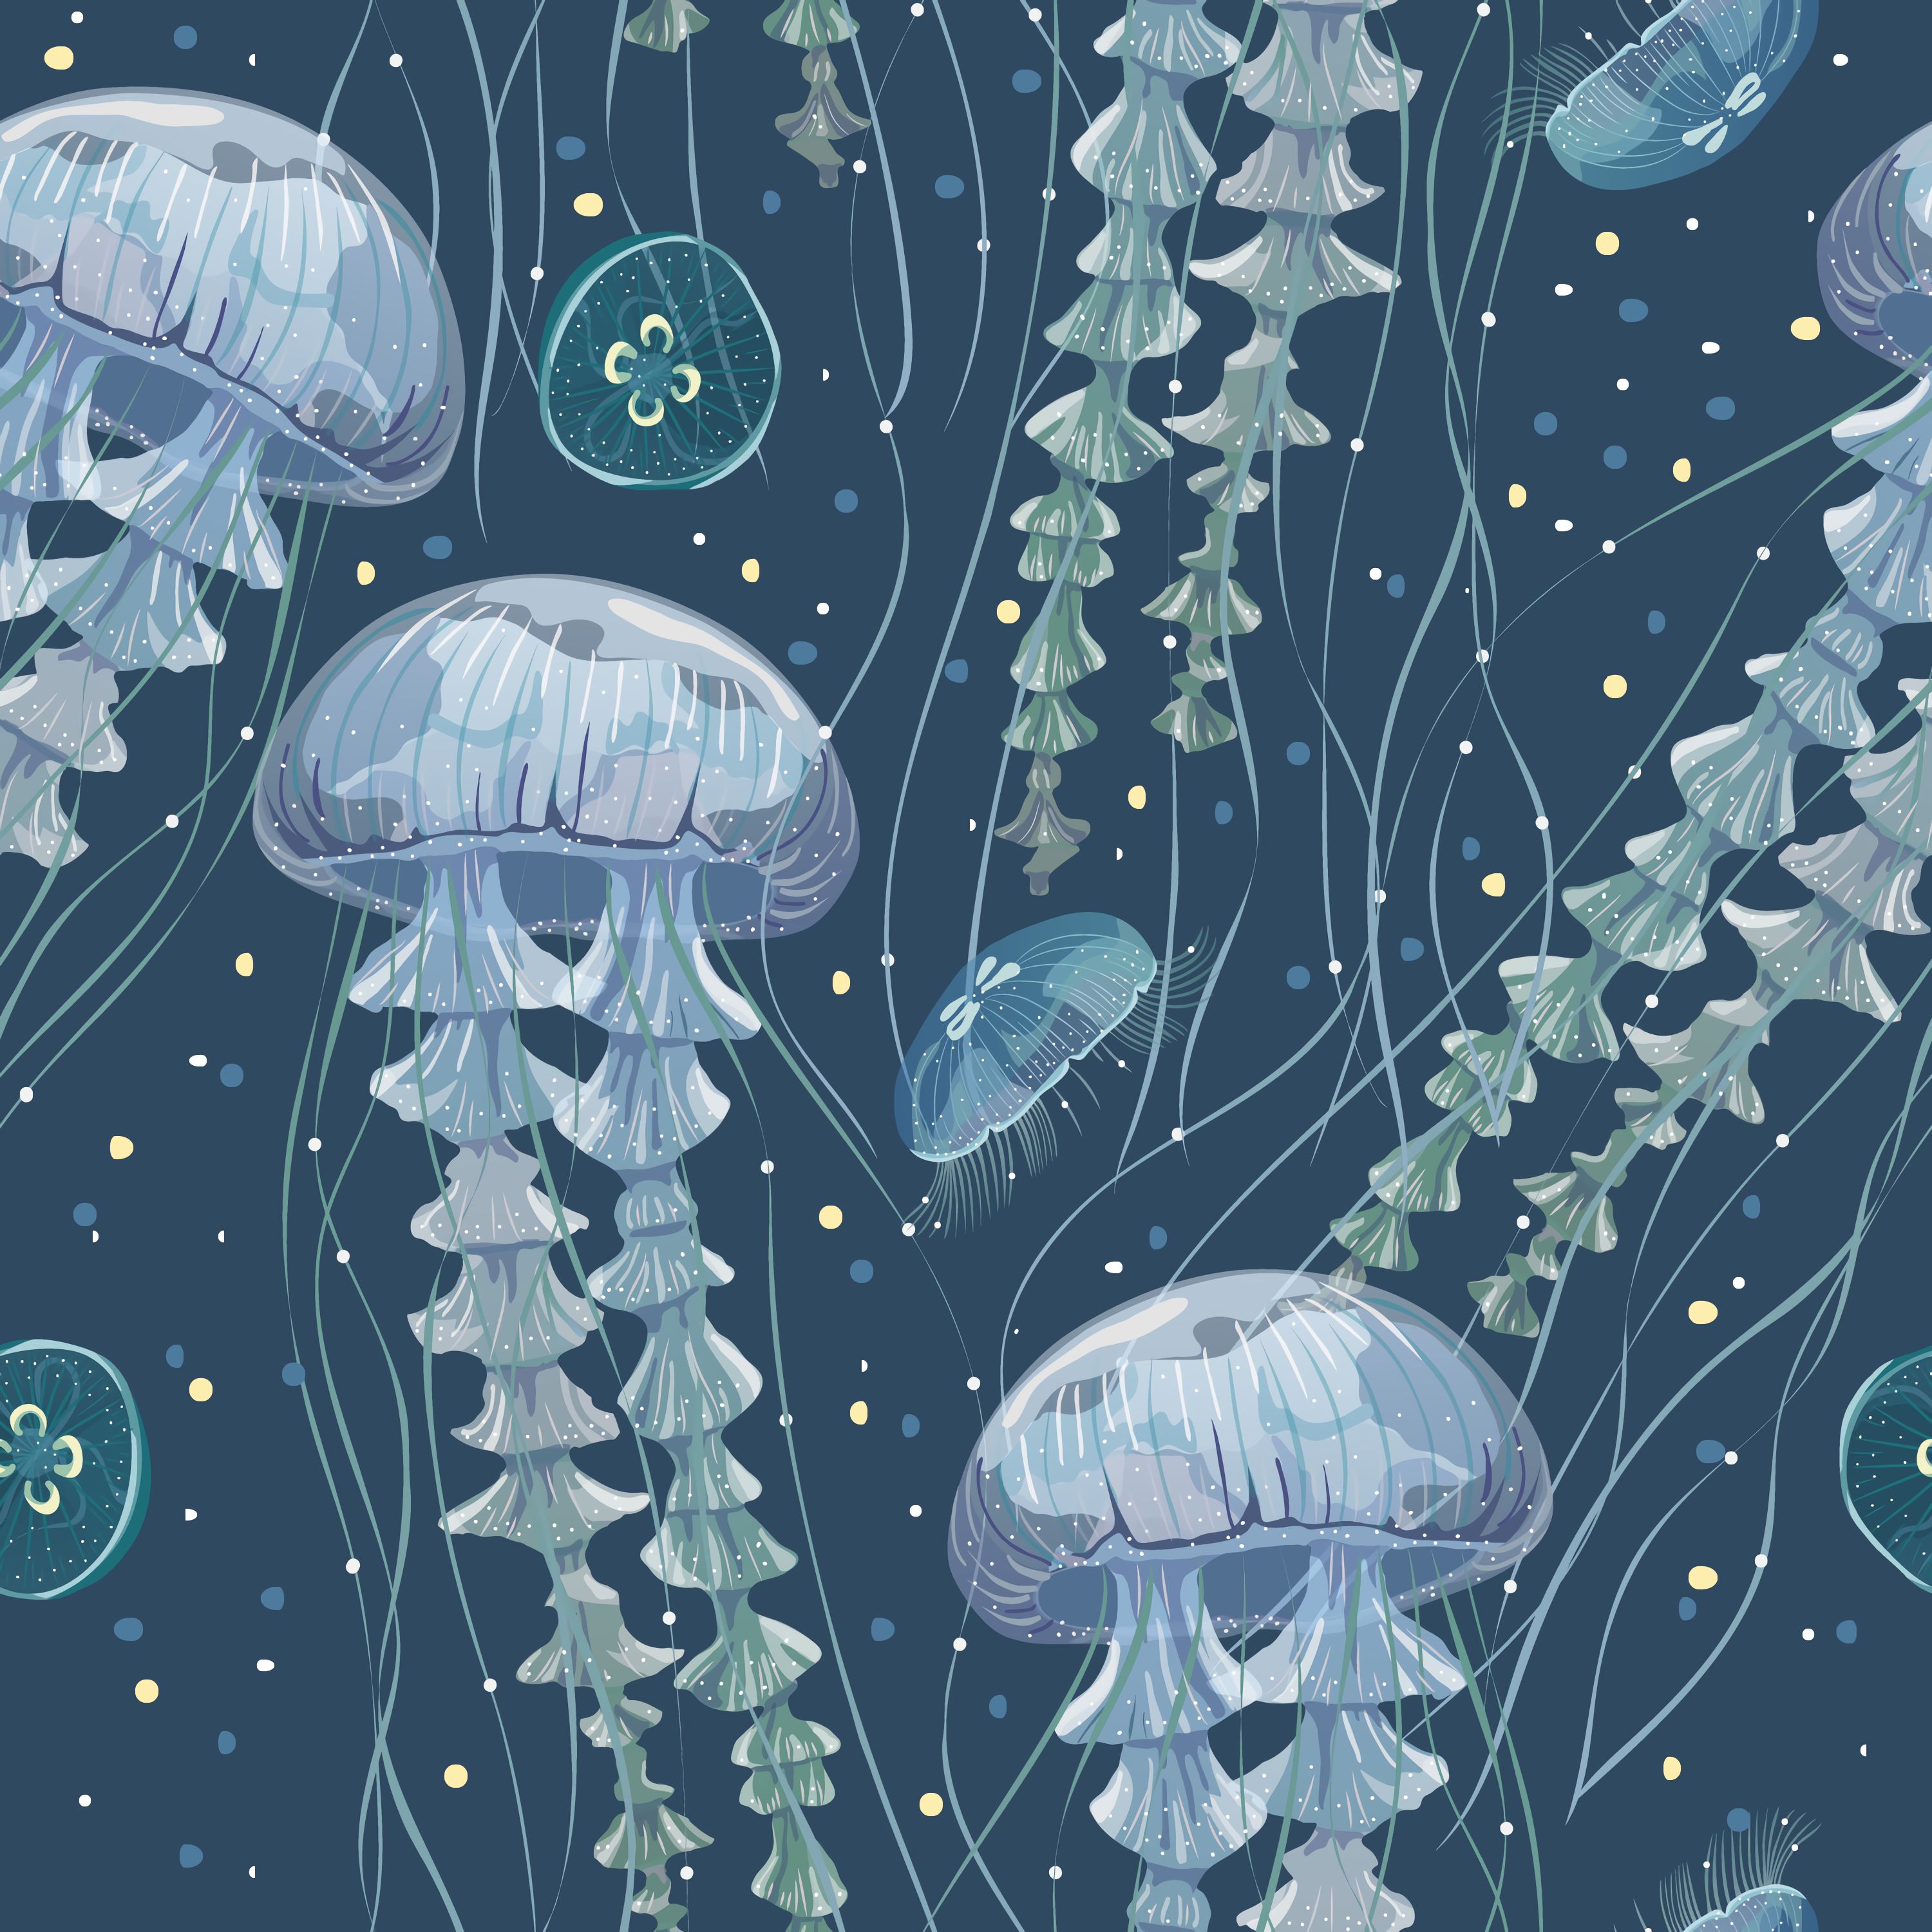 56183 download wallpaper art, jellyfish, vector, underwater world, tentacles, seaweed, algae screensavers and pictures for free